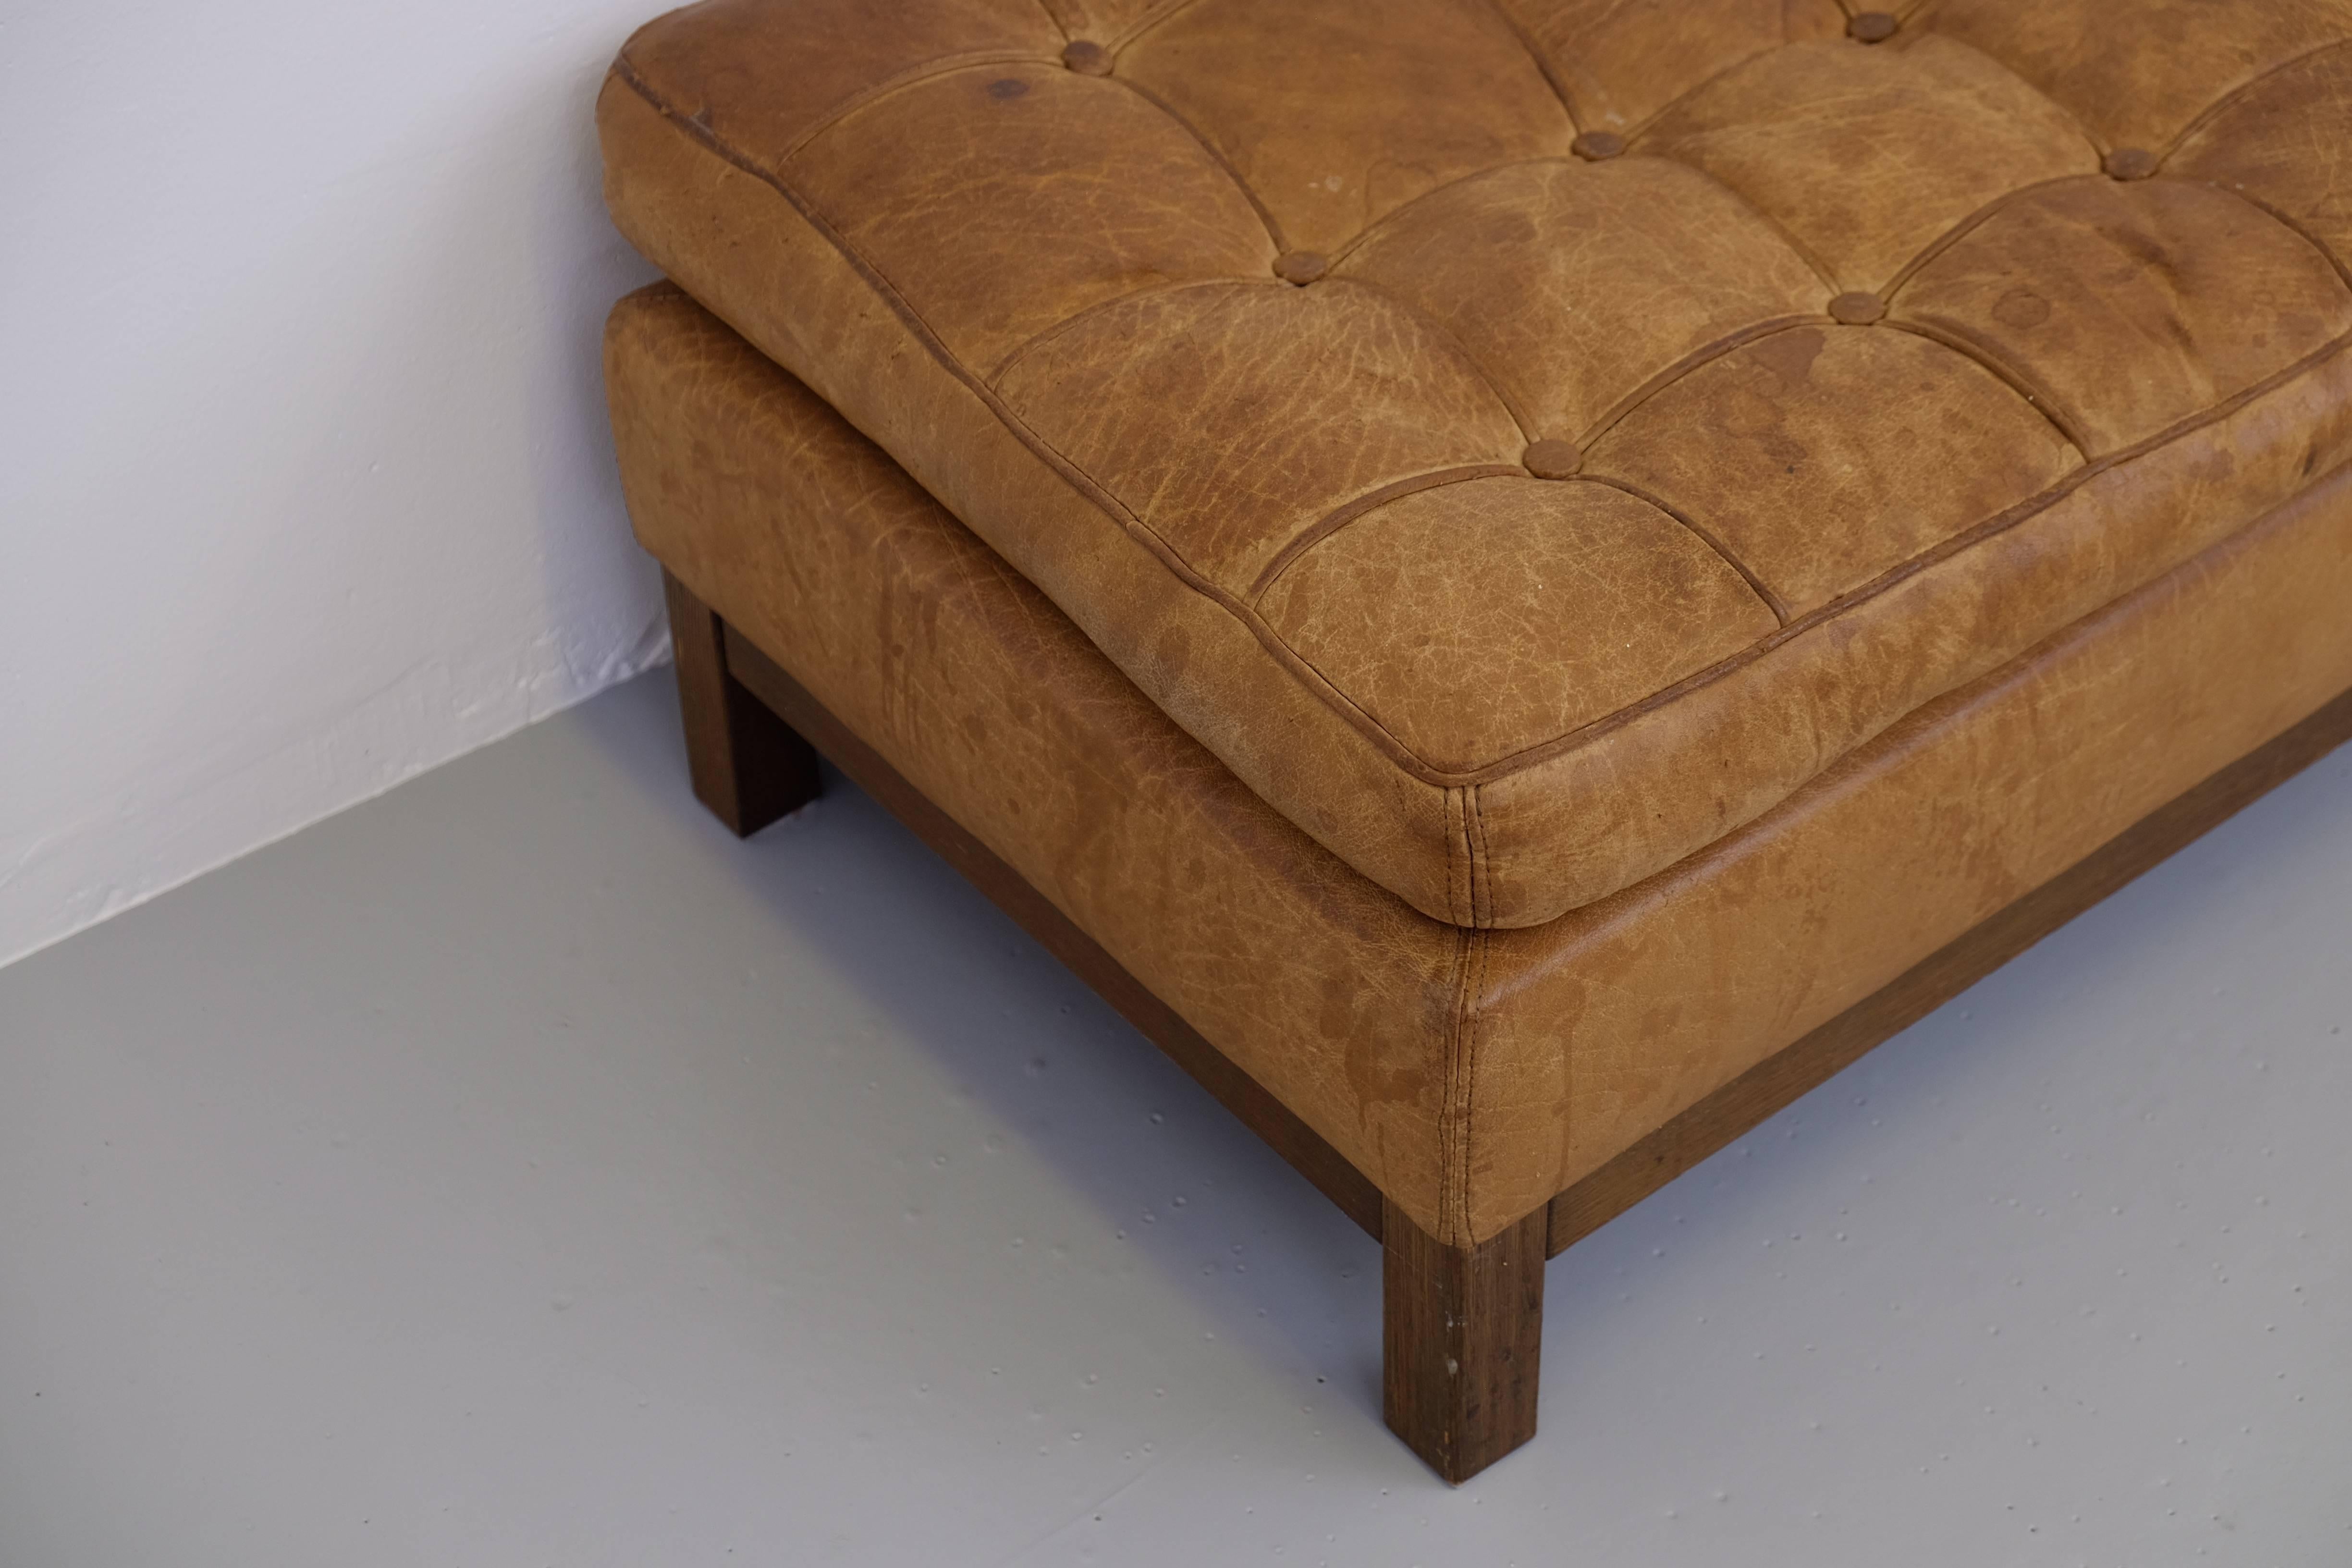 Great vintage condition, natural buffalo leather.
Produced by Arne Norell Möbel in Aneby, Sweden, 1960s.